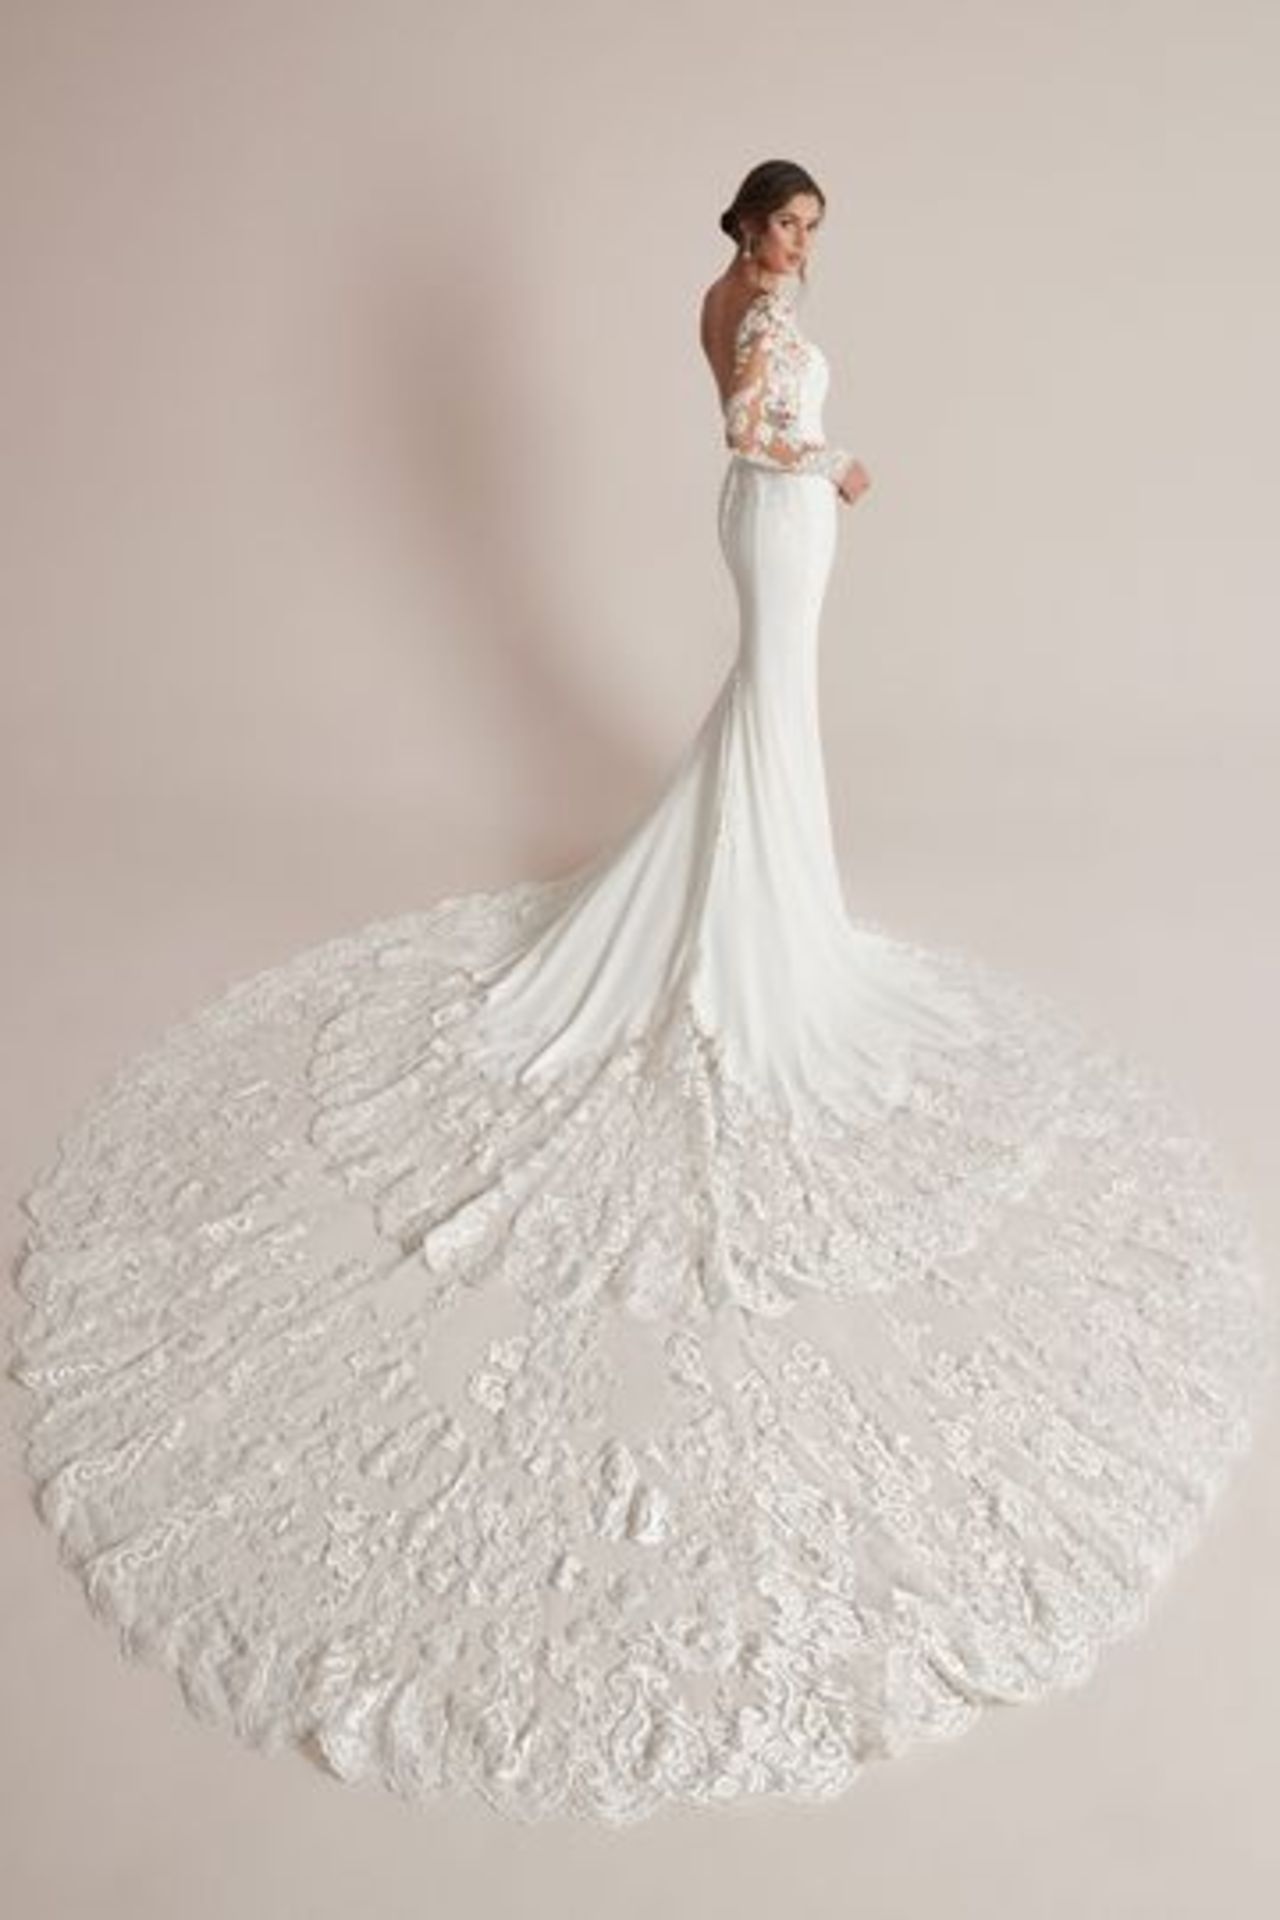 1 x Justin Alexander Alivia Designer Crepe Wedding Gown With Cathedral Train - Size 12 - RRP £1,654 - Image 10 of 14